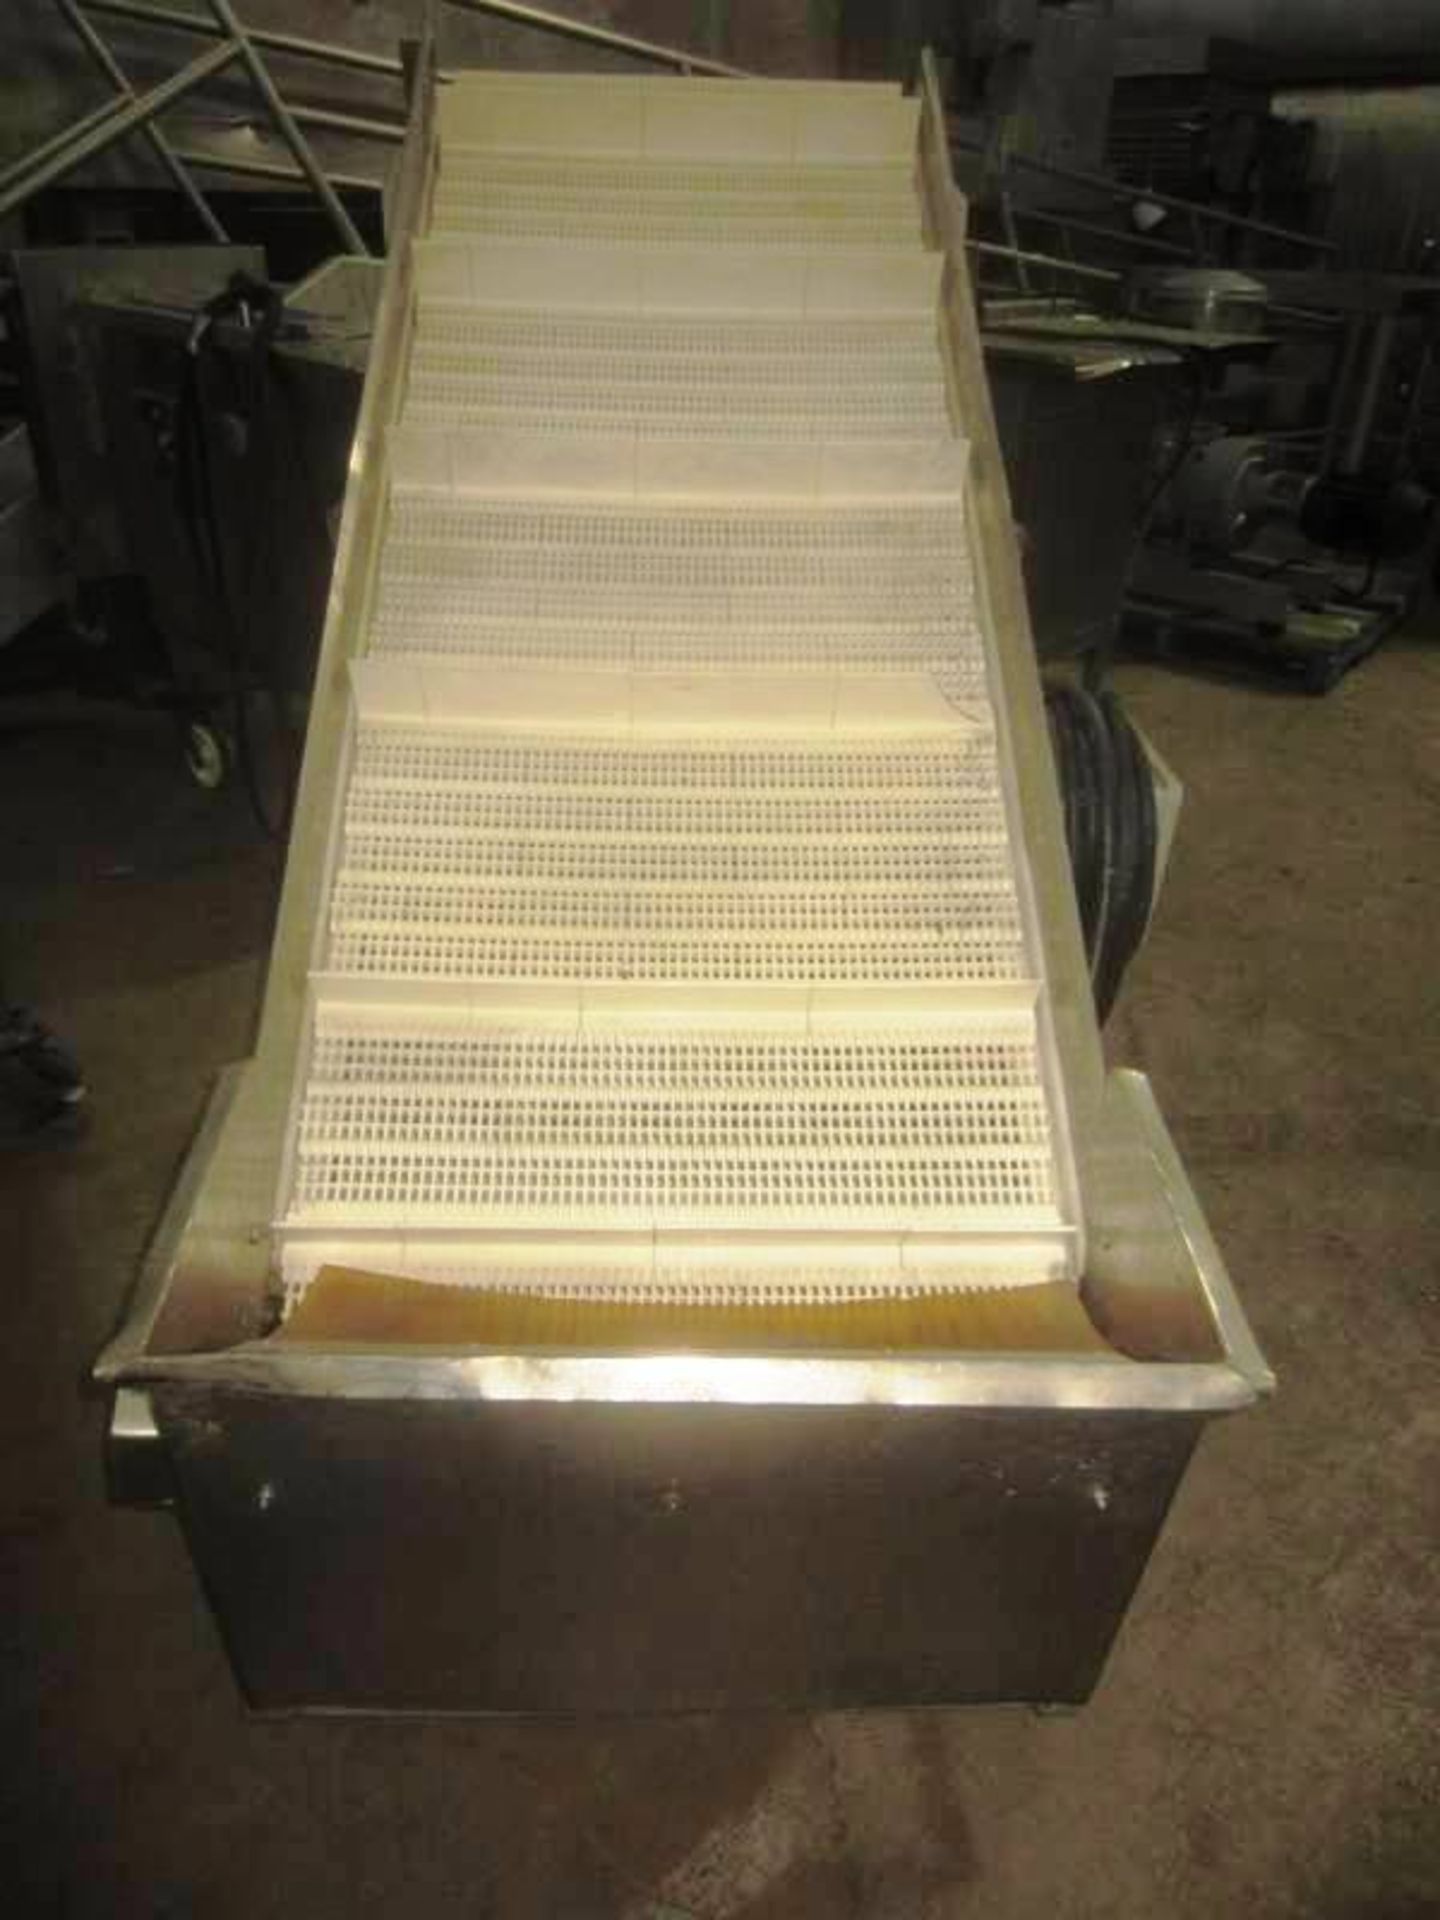 Stainless Steel Incline Conveyor, 24" W X 69" L flighted plastic belt, 2" high flights spaced 12" - Image 3 of 3